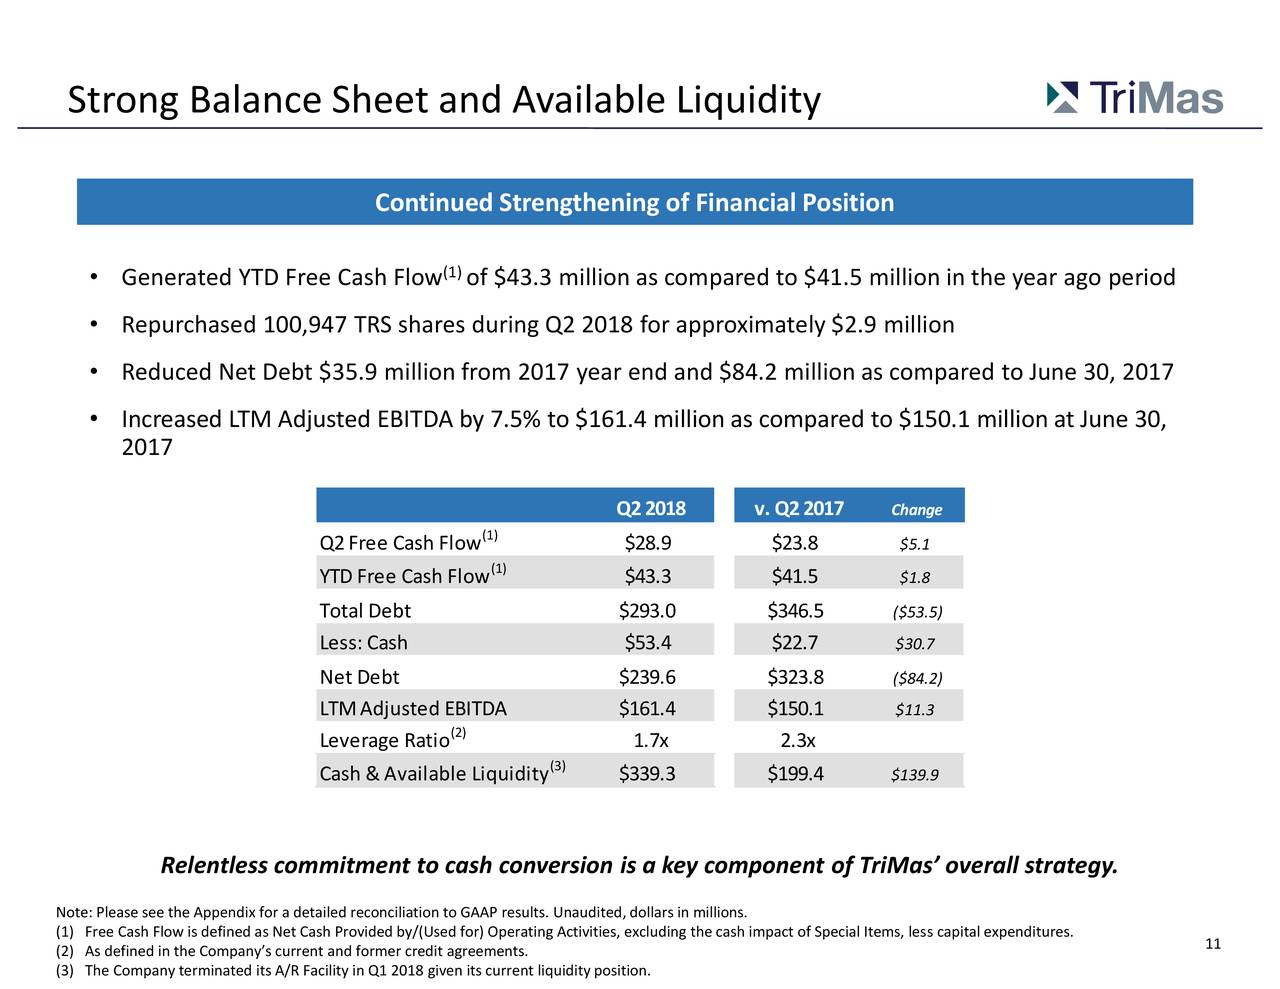 Strong Balance Sheet and Available Liquidity